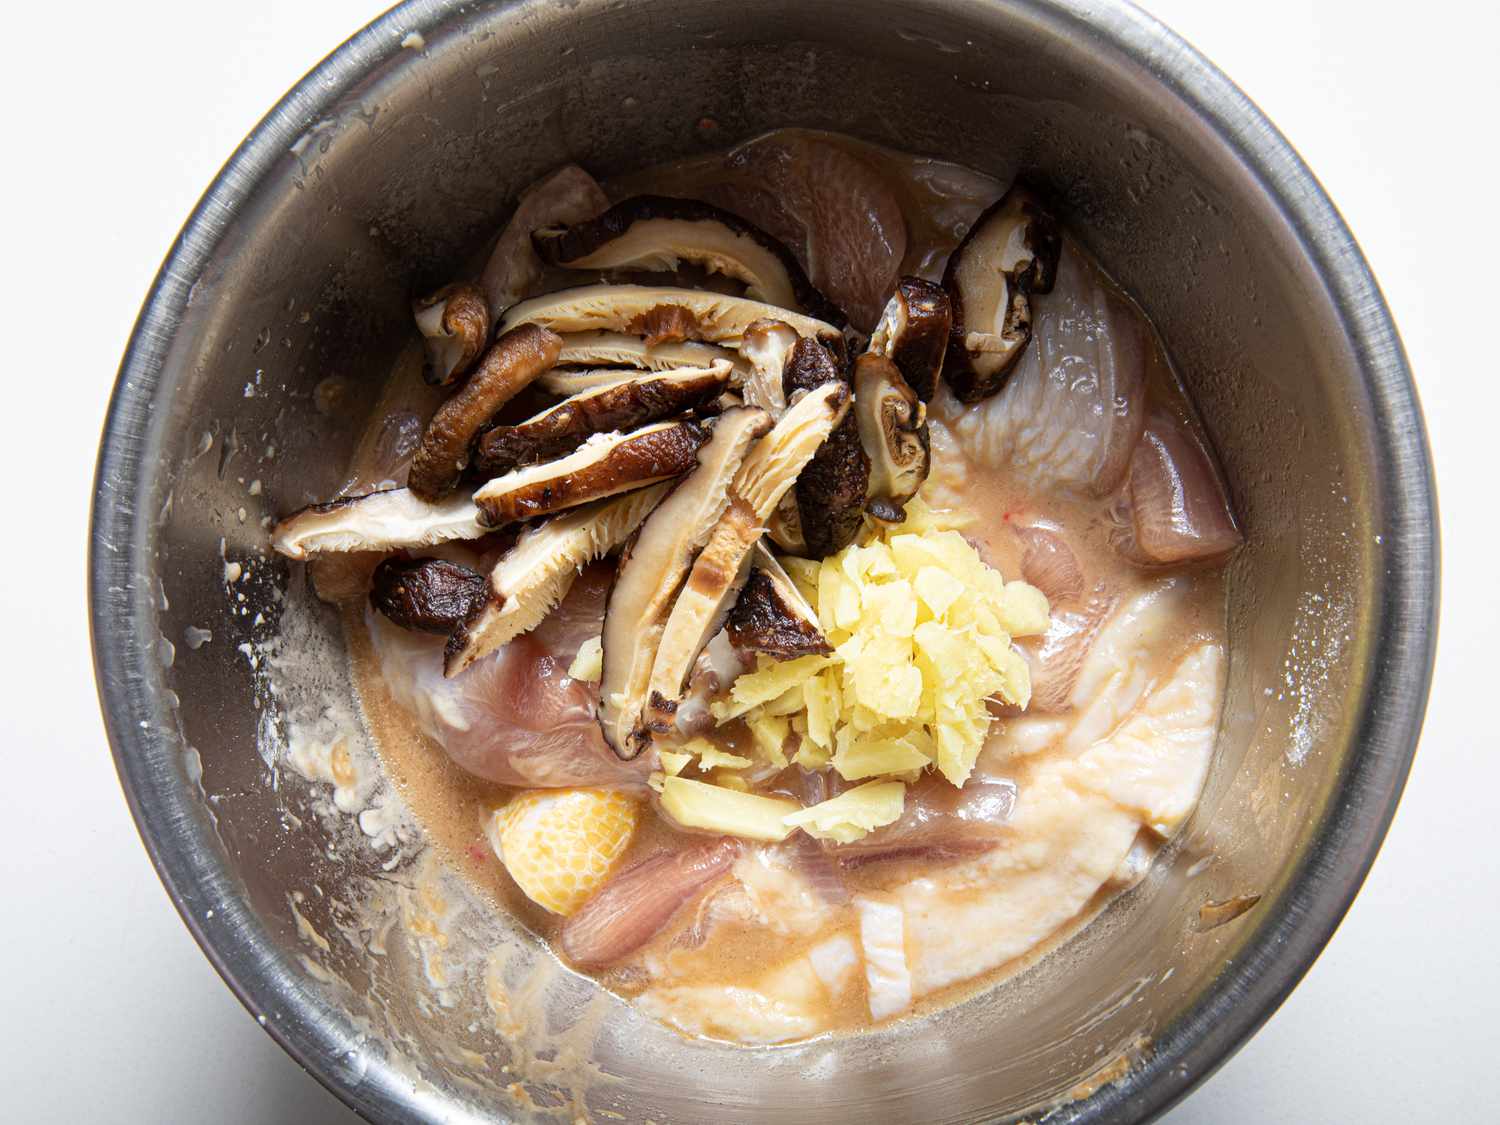 Shiitake mushrooms and ginger on top of raw chicken in a stainless steel bowl.